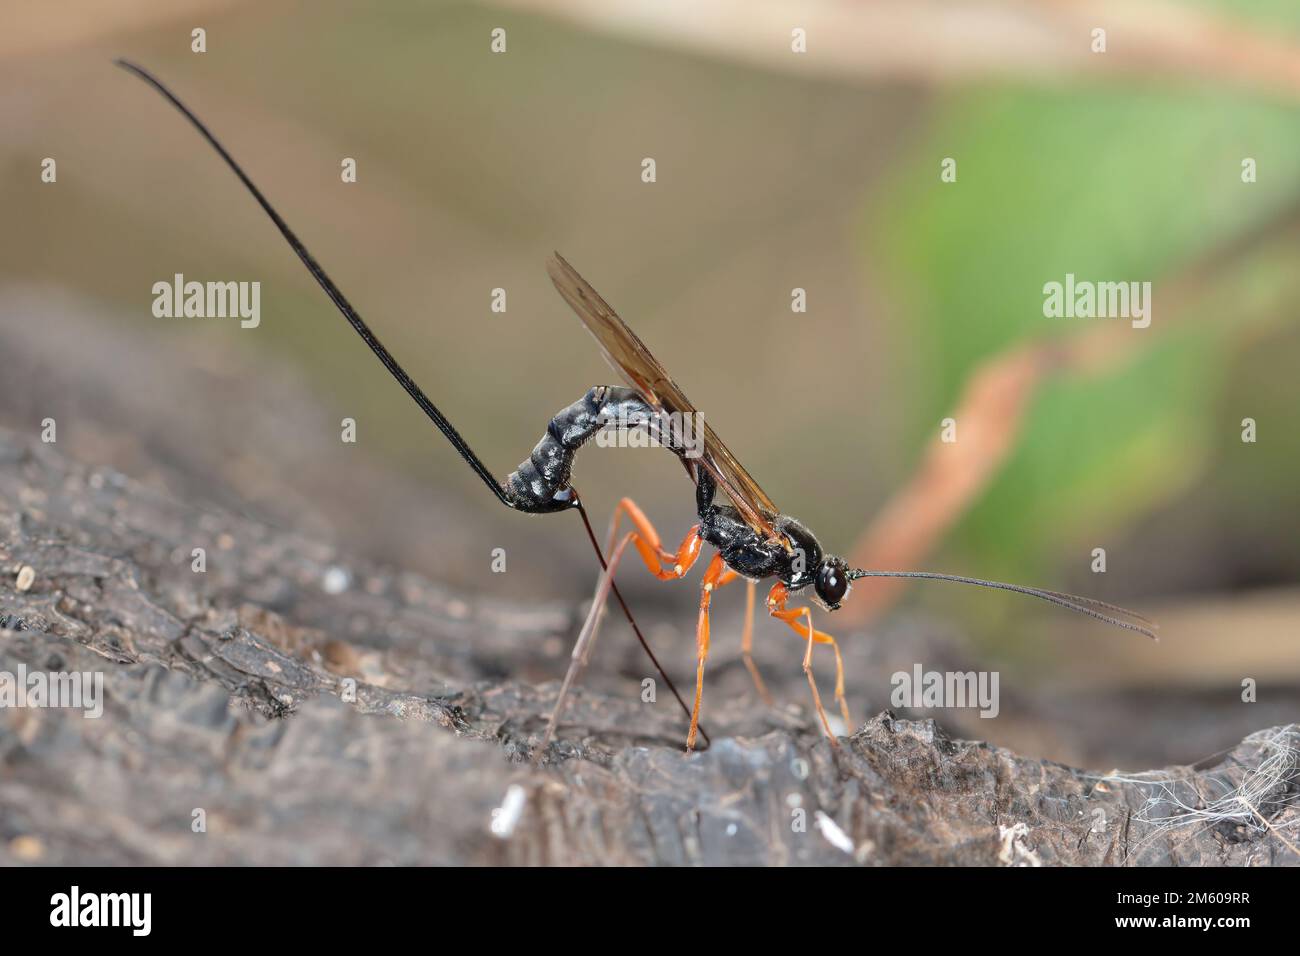 Ichneumon wasp (Dolichomitus imperator). The wasp deposits its eggs into a host larva. Stock Photo